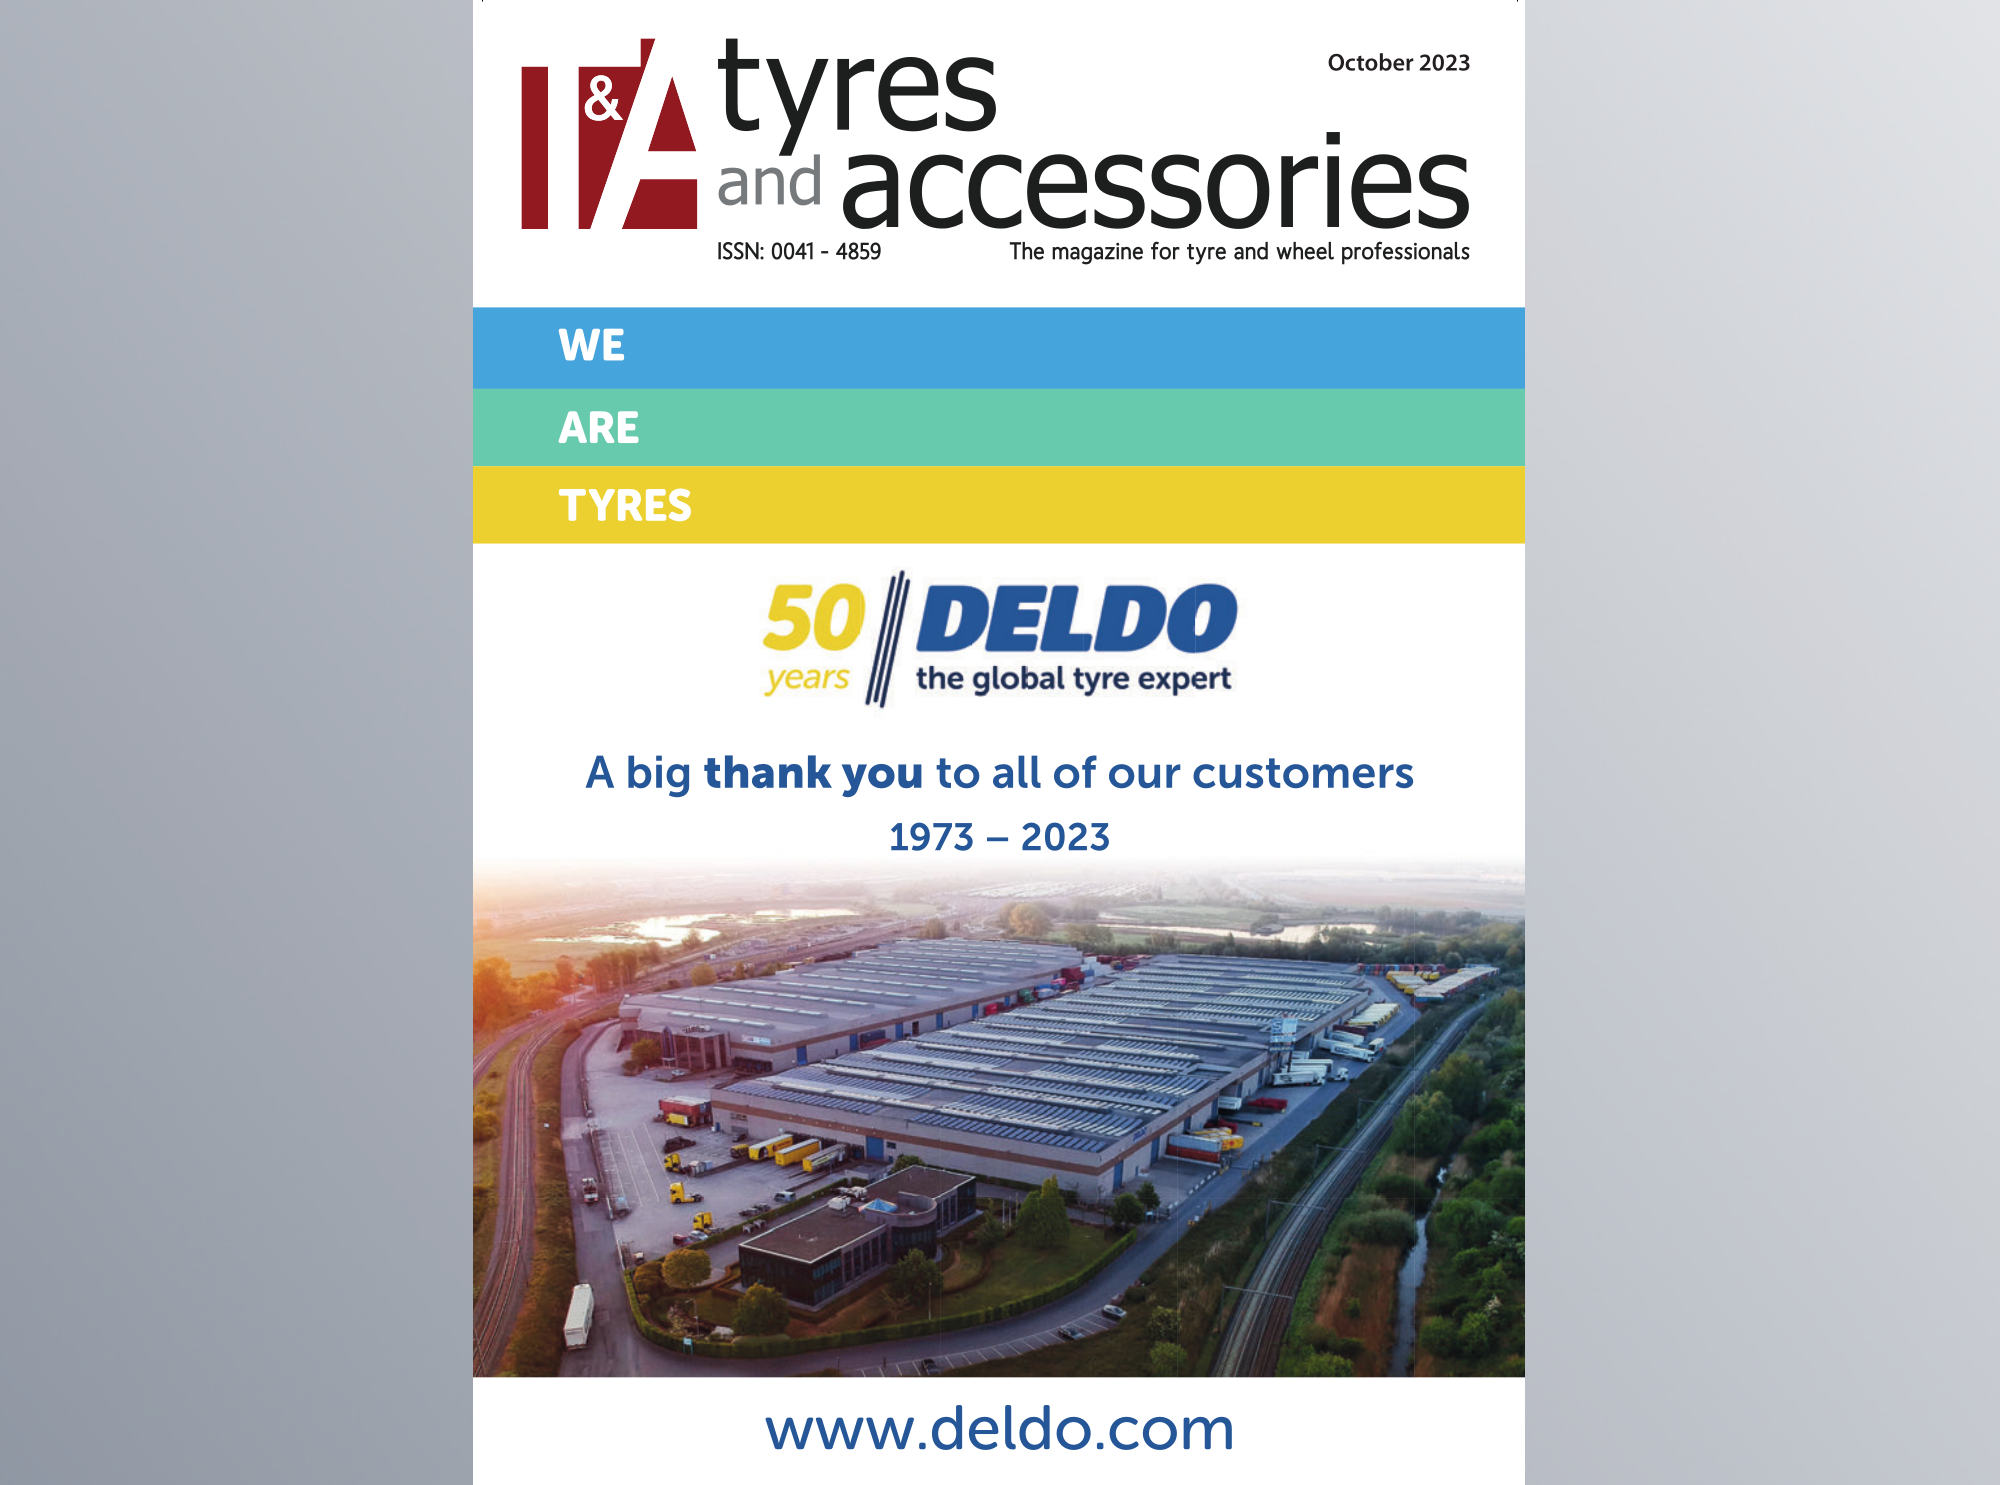 Tyres & Accessories October 2023 issue out now